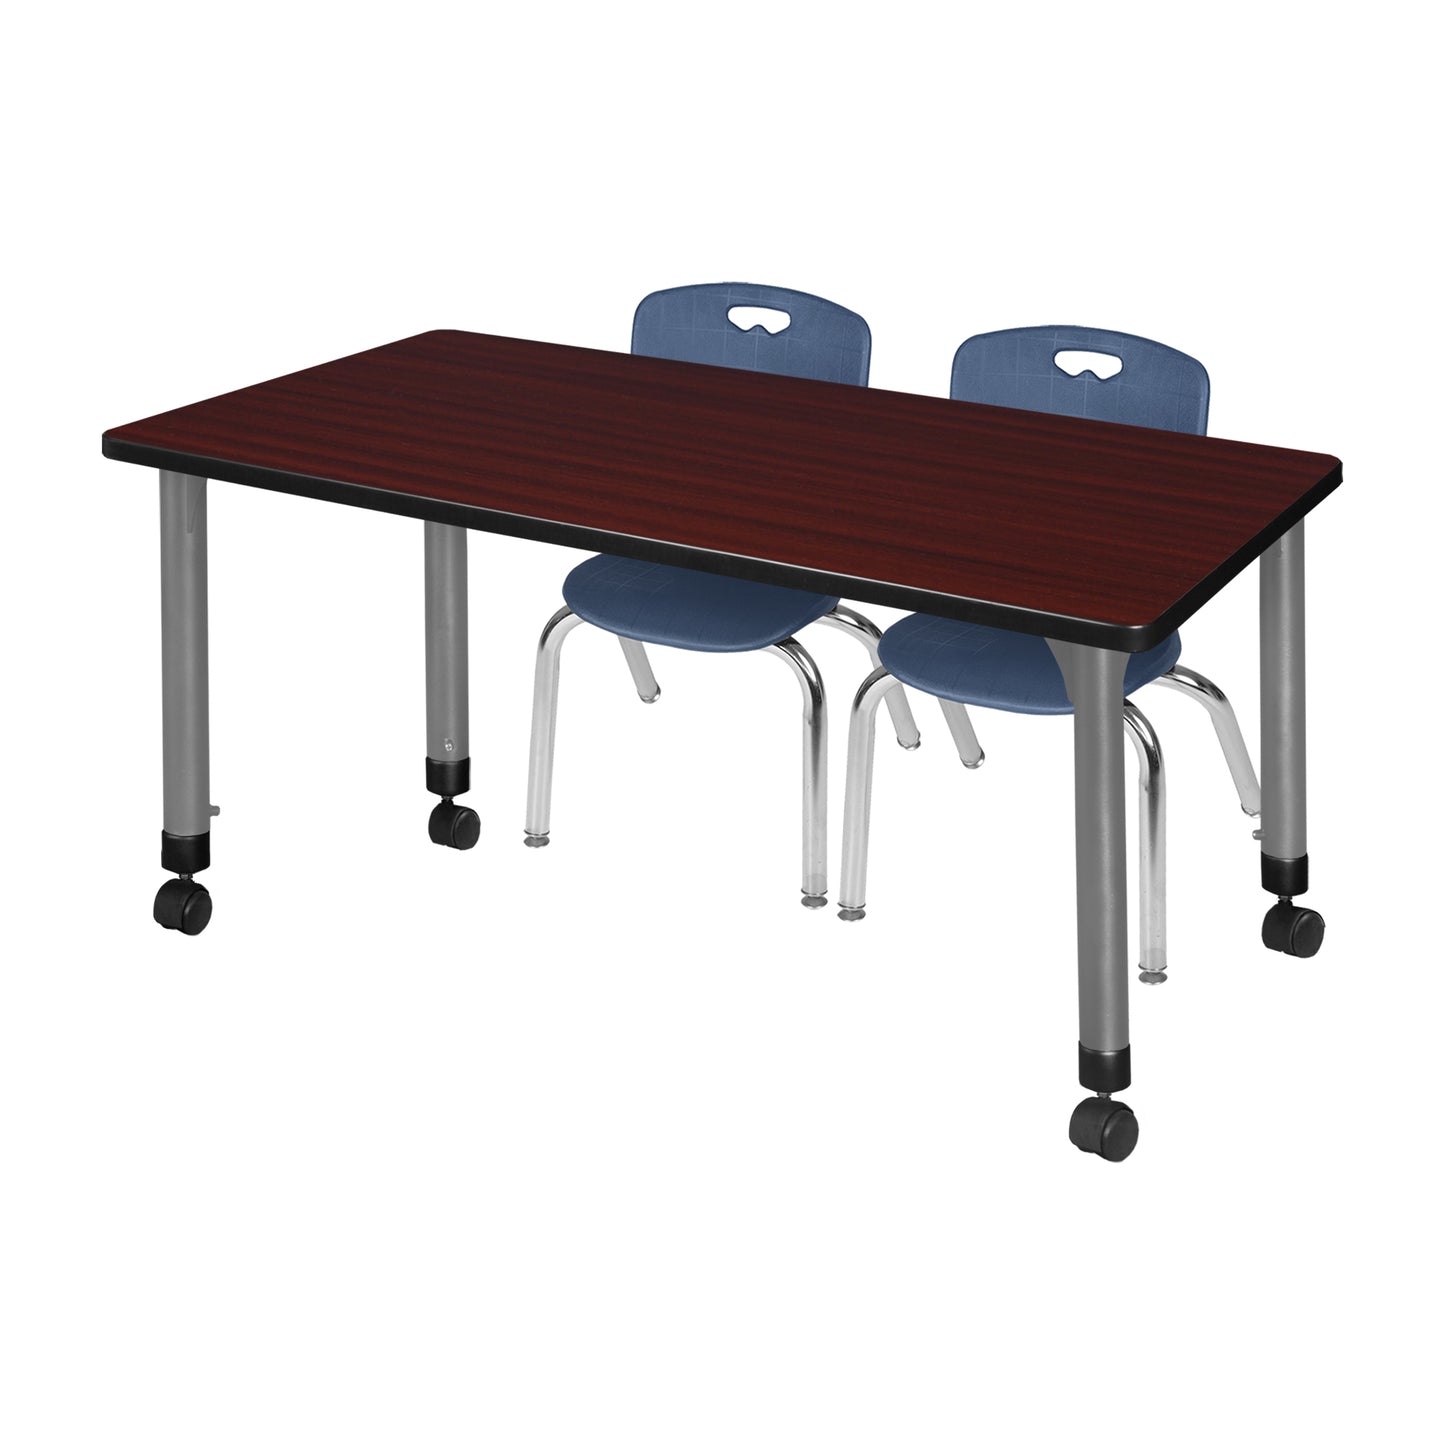 Regency Kee 66 x 24 in. Adjustable Classroom Table & 2 Andy 12 in. Stack Chairs